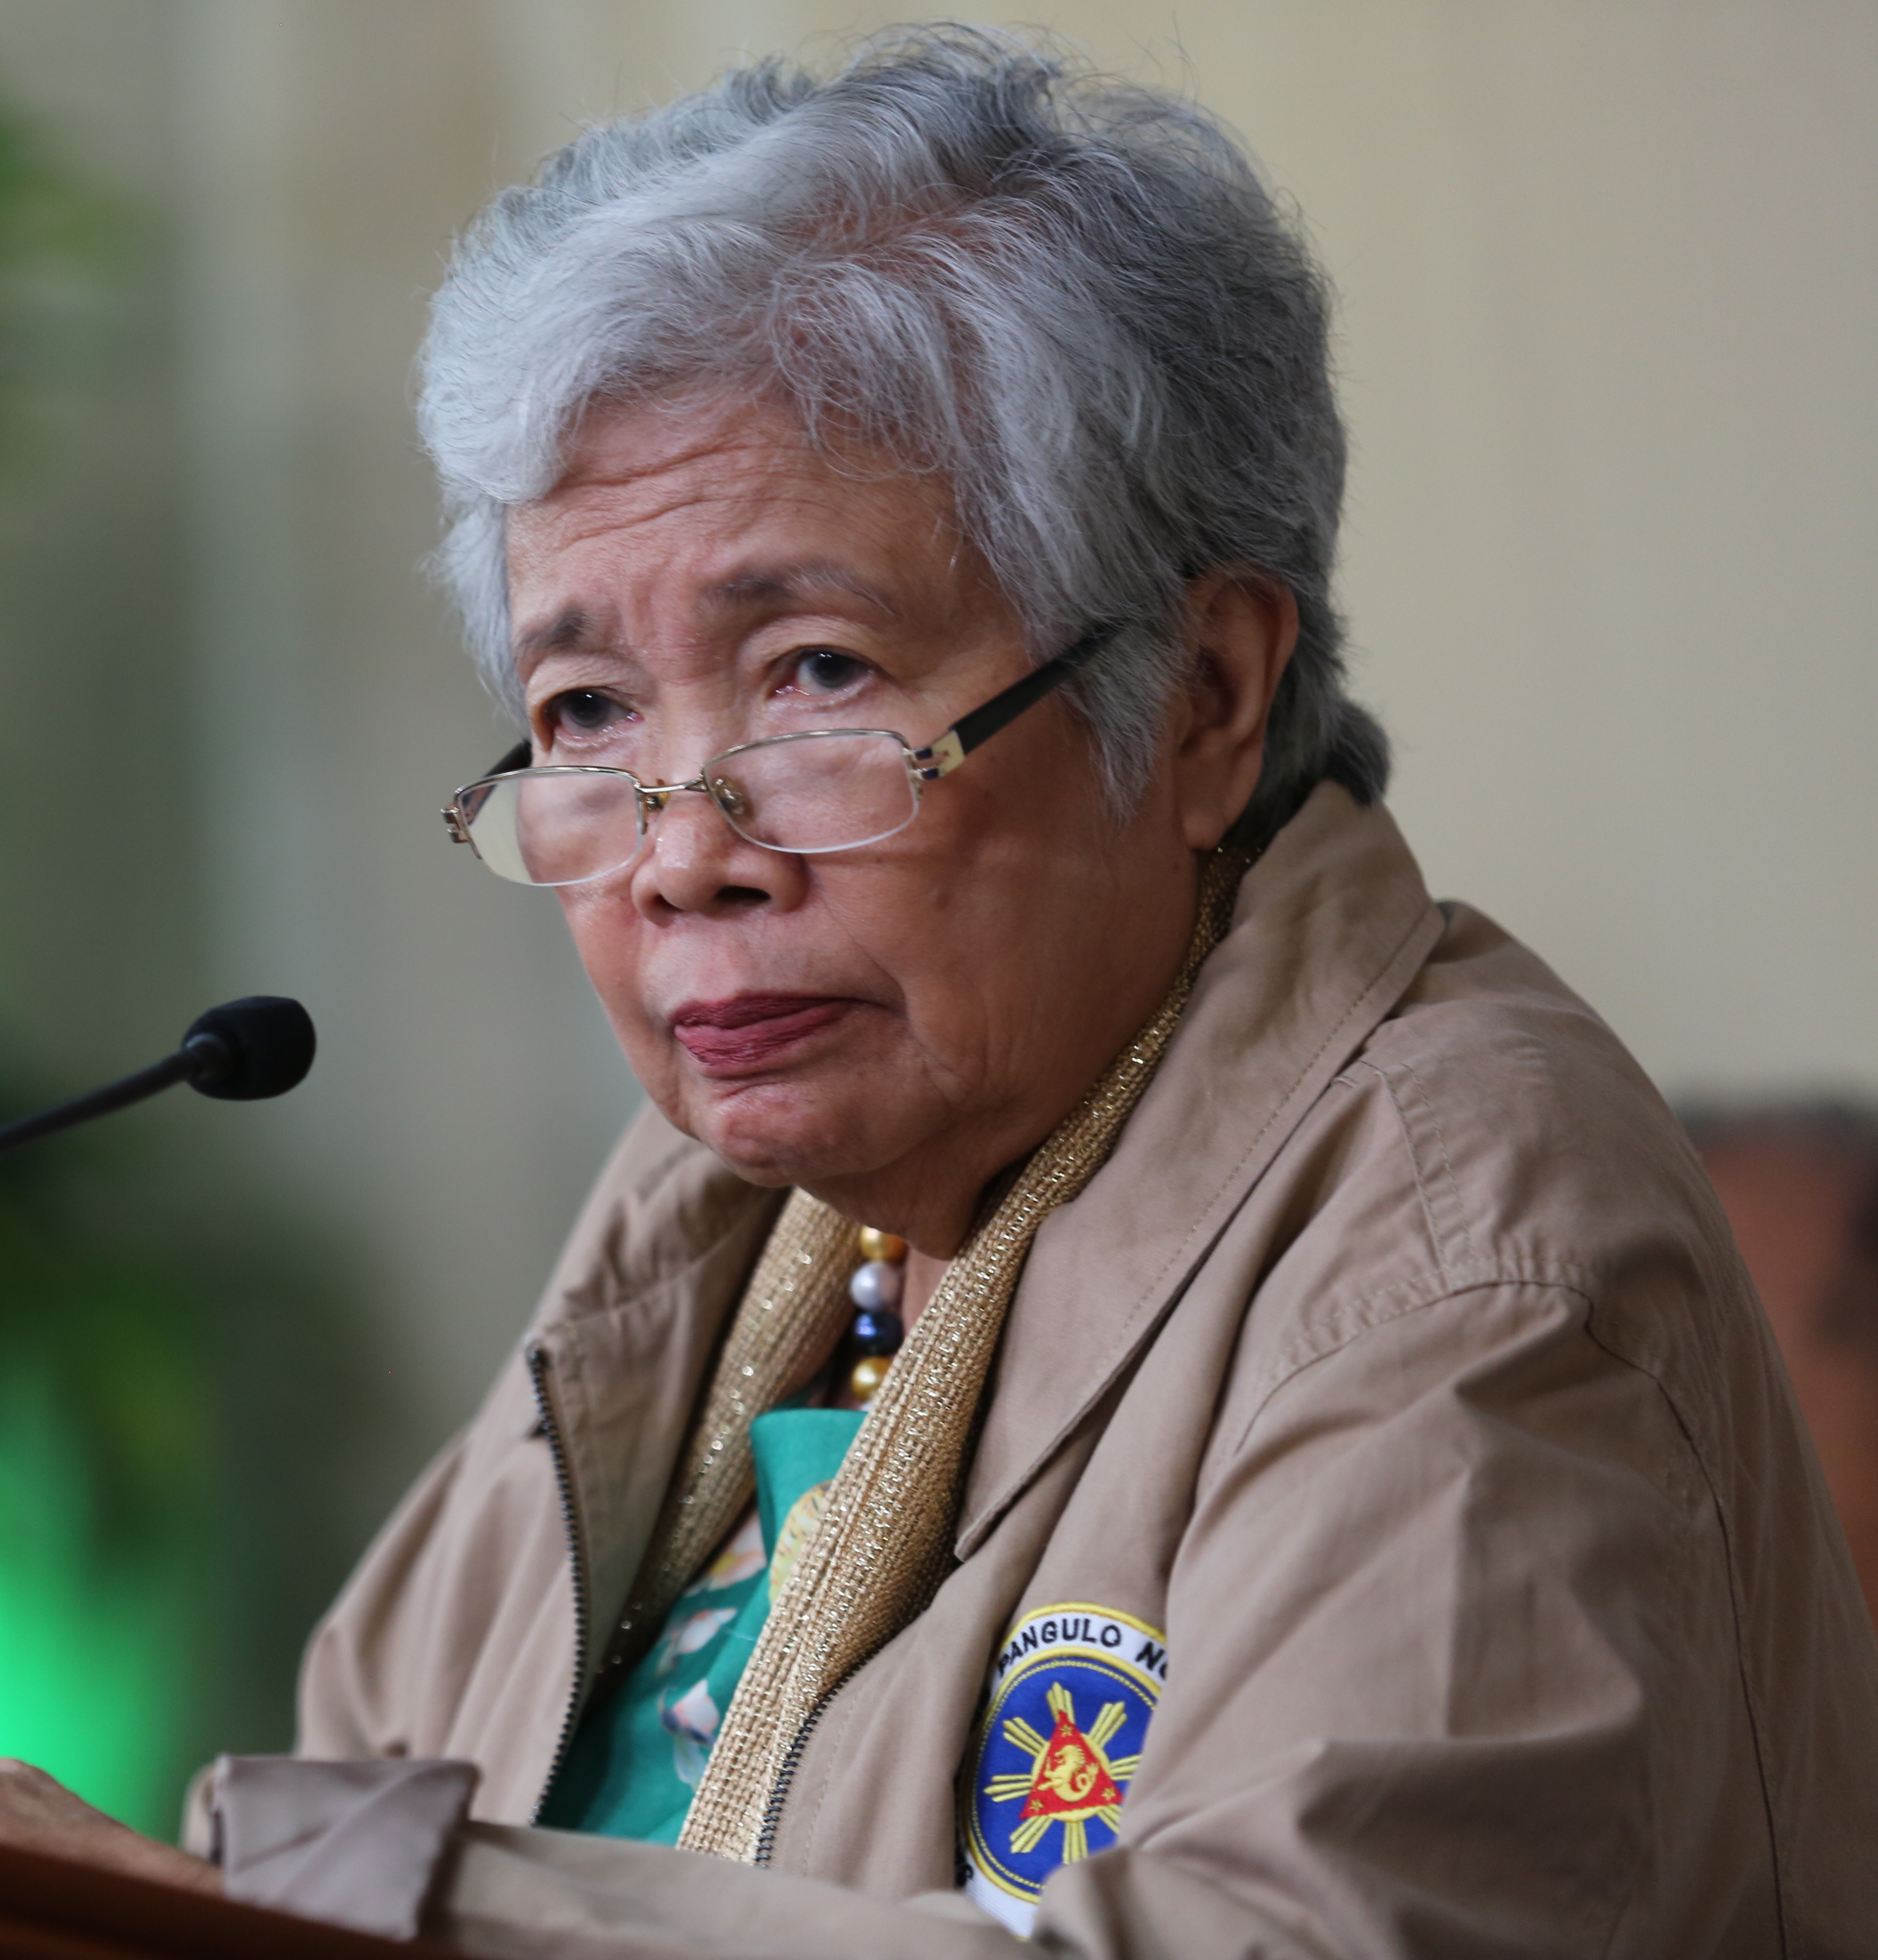 DepEd may change dismissal order vs Ateneo student to expulsion if…